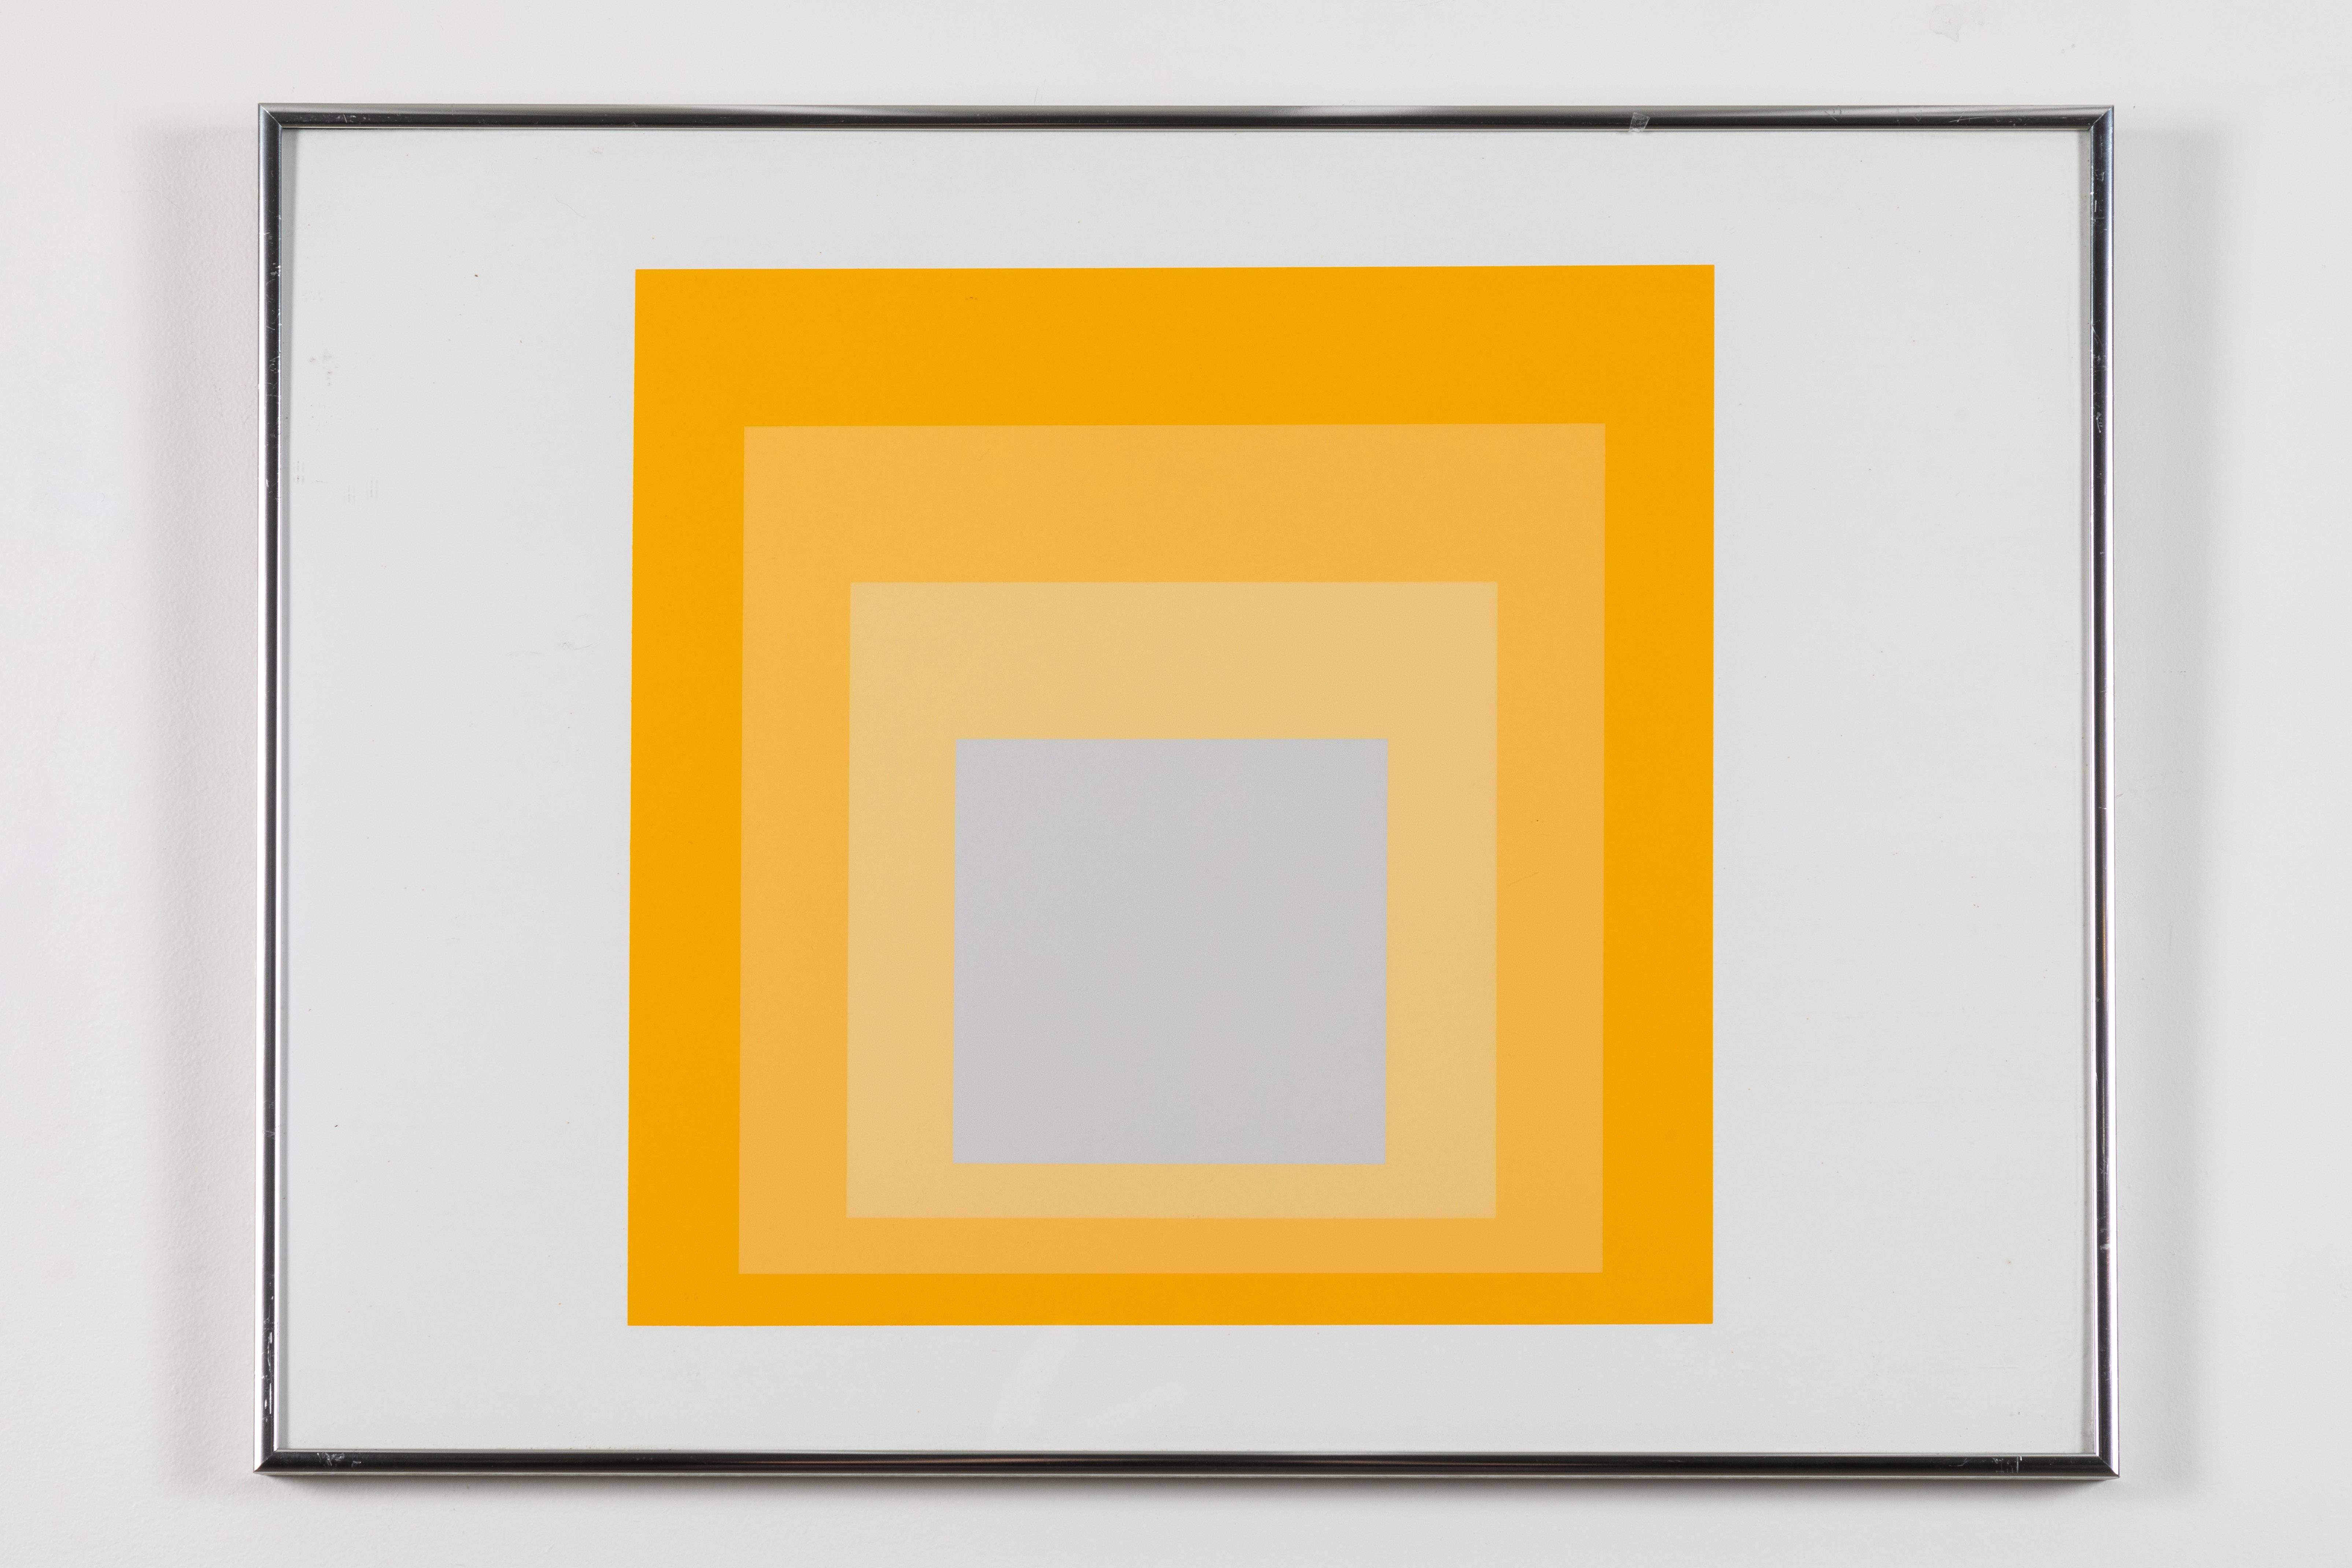 1 of 4 Folio Prints from Formulation Articulation by Josef Albers 2